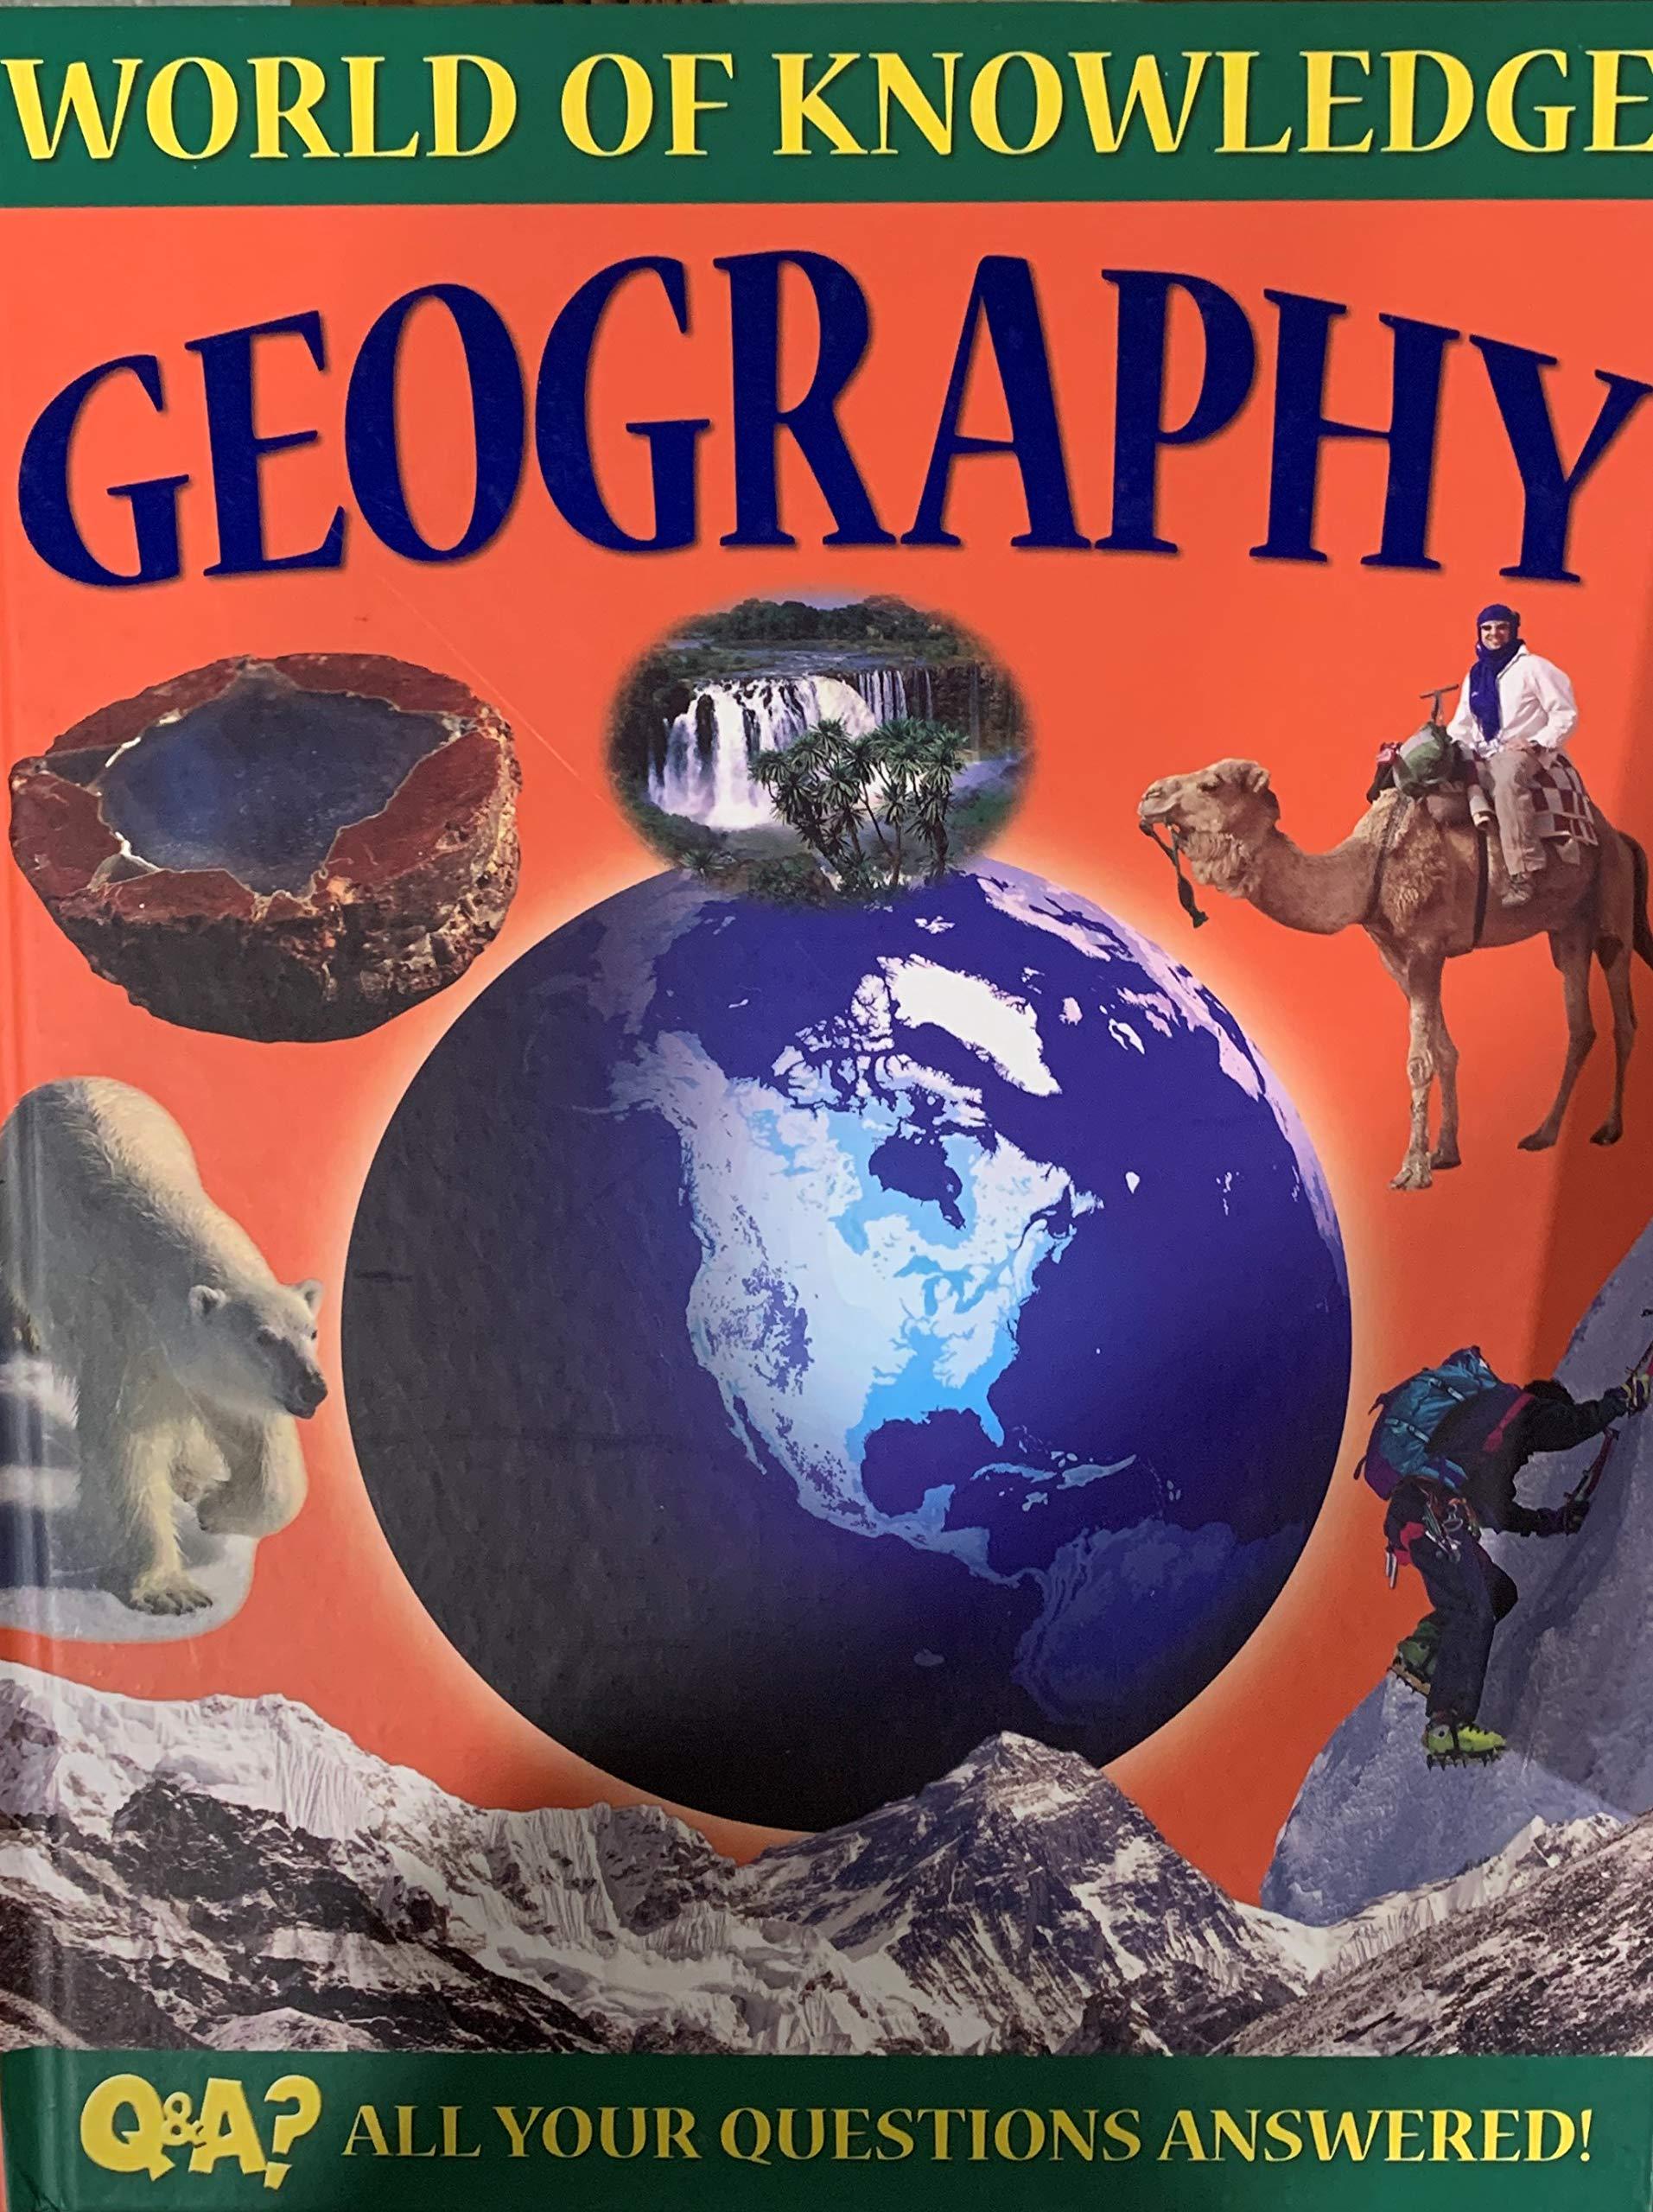 World of Knowledge: Geography